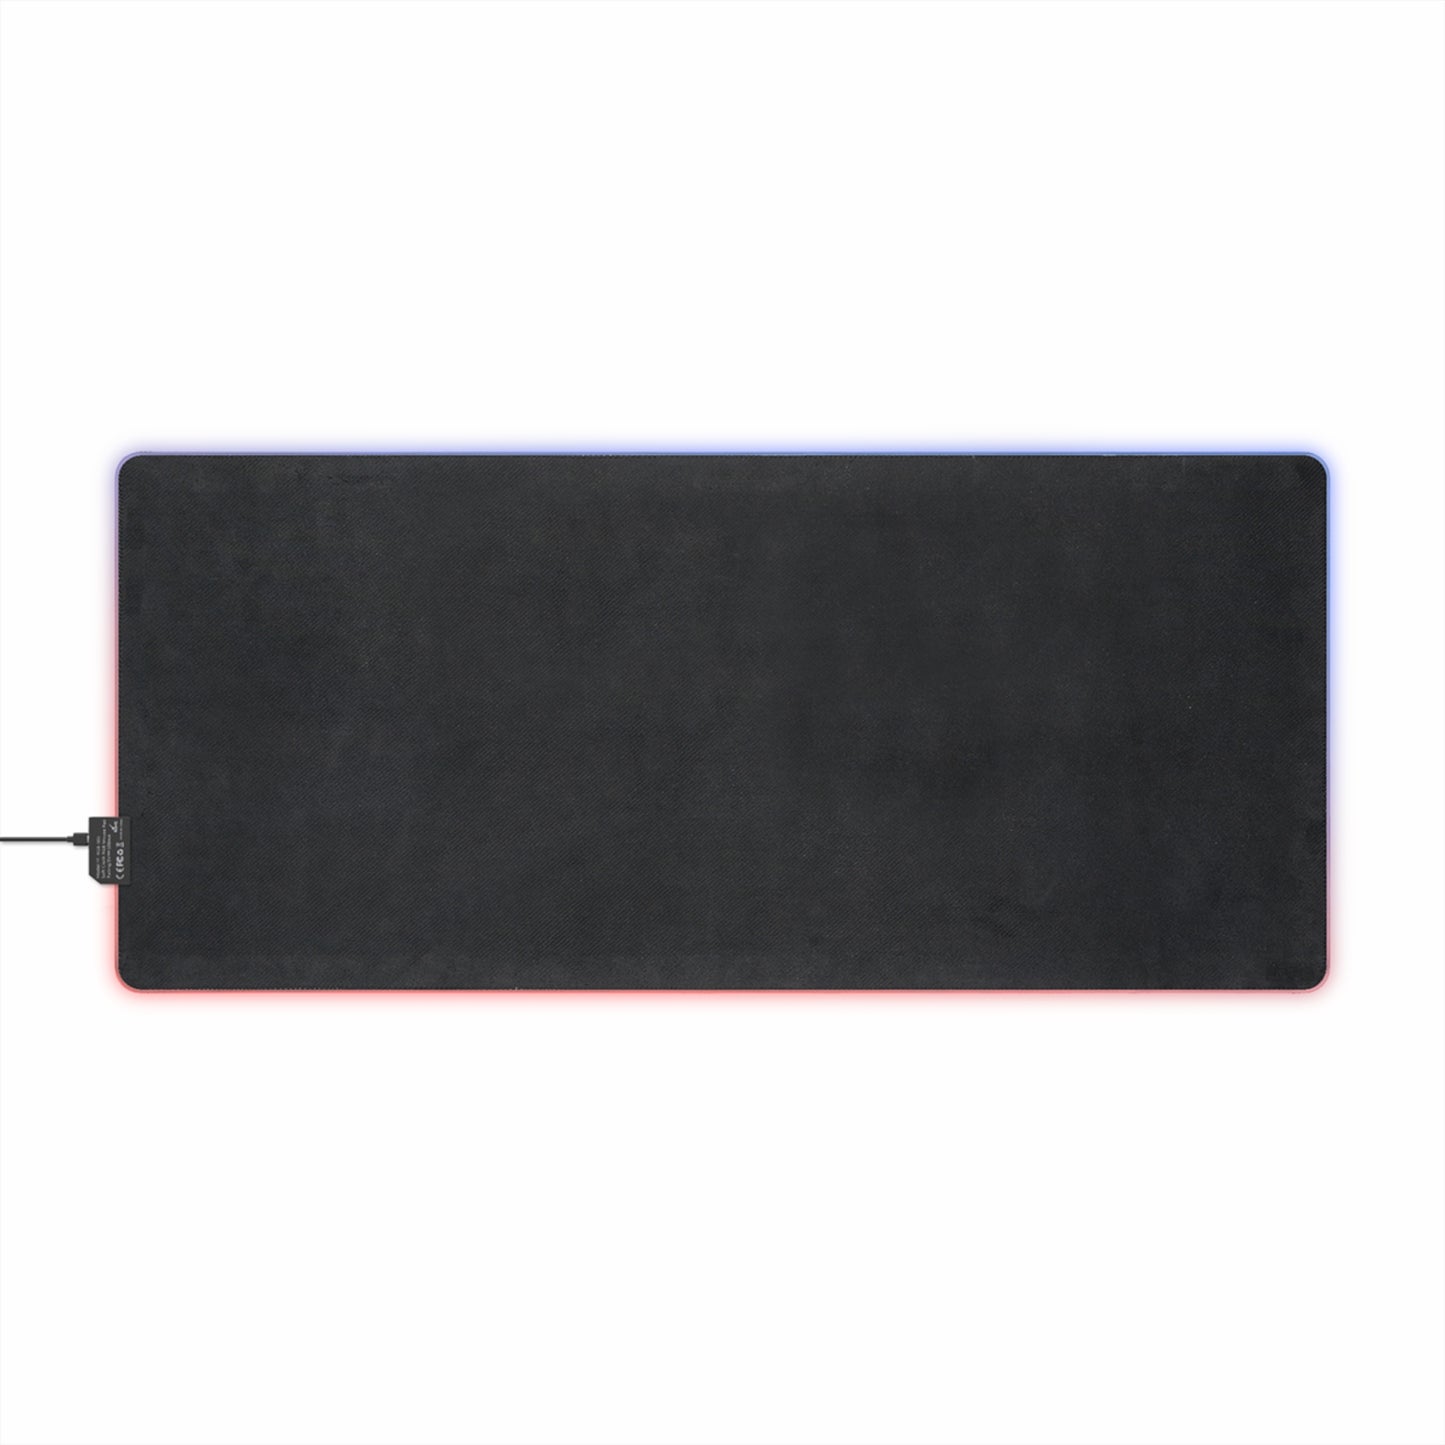 CLMP-13 LED Gaming Mouse Pad